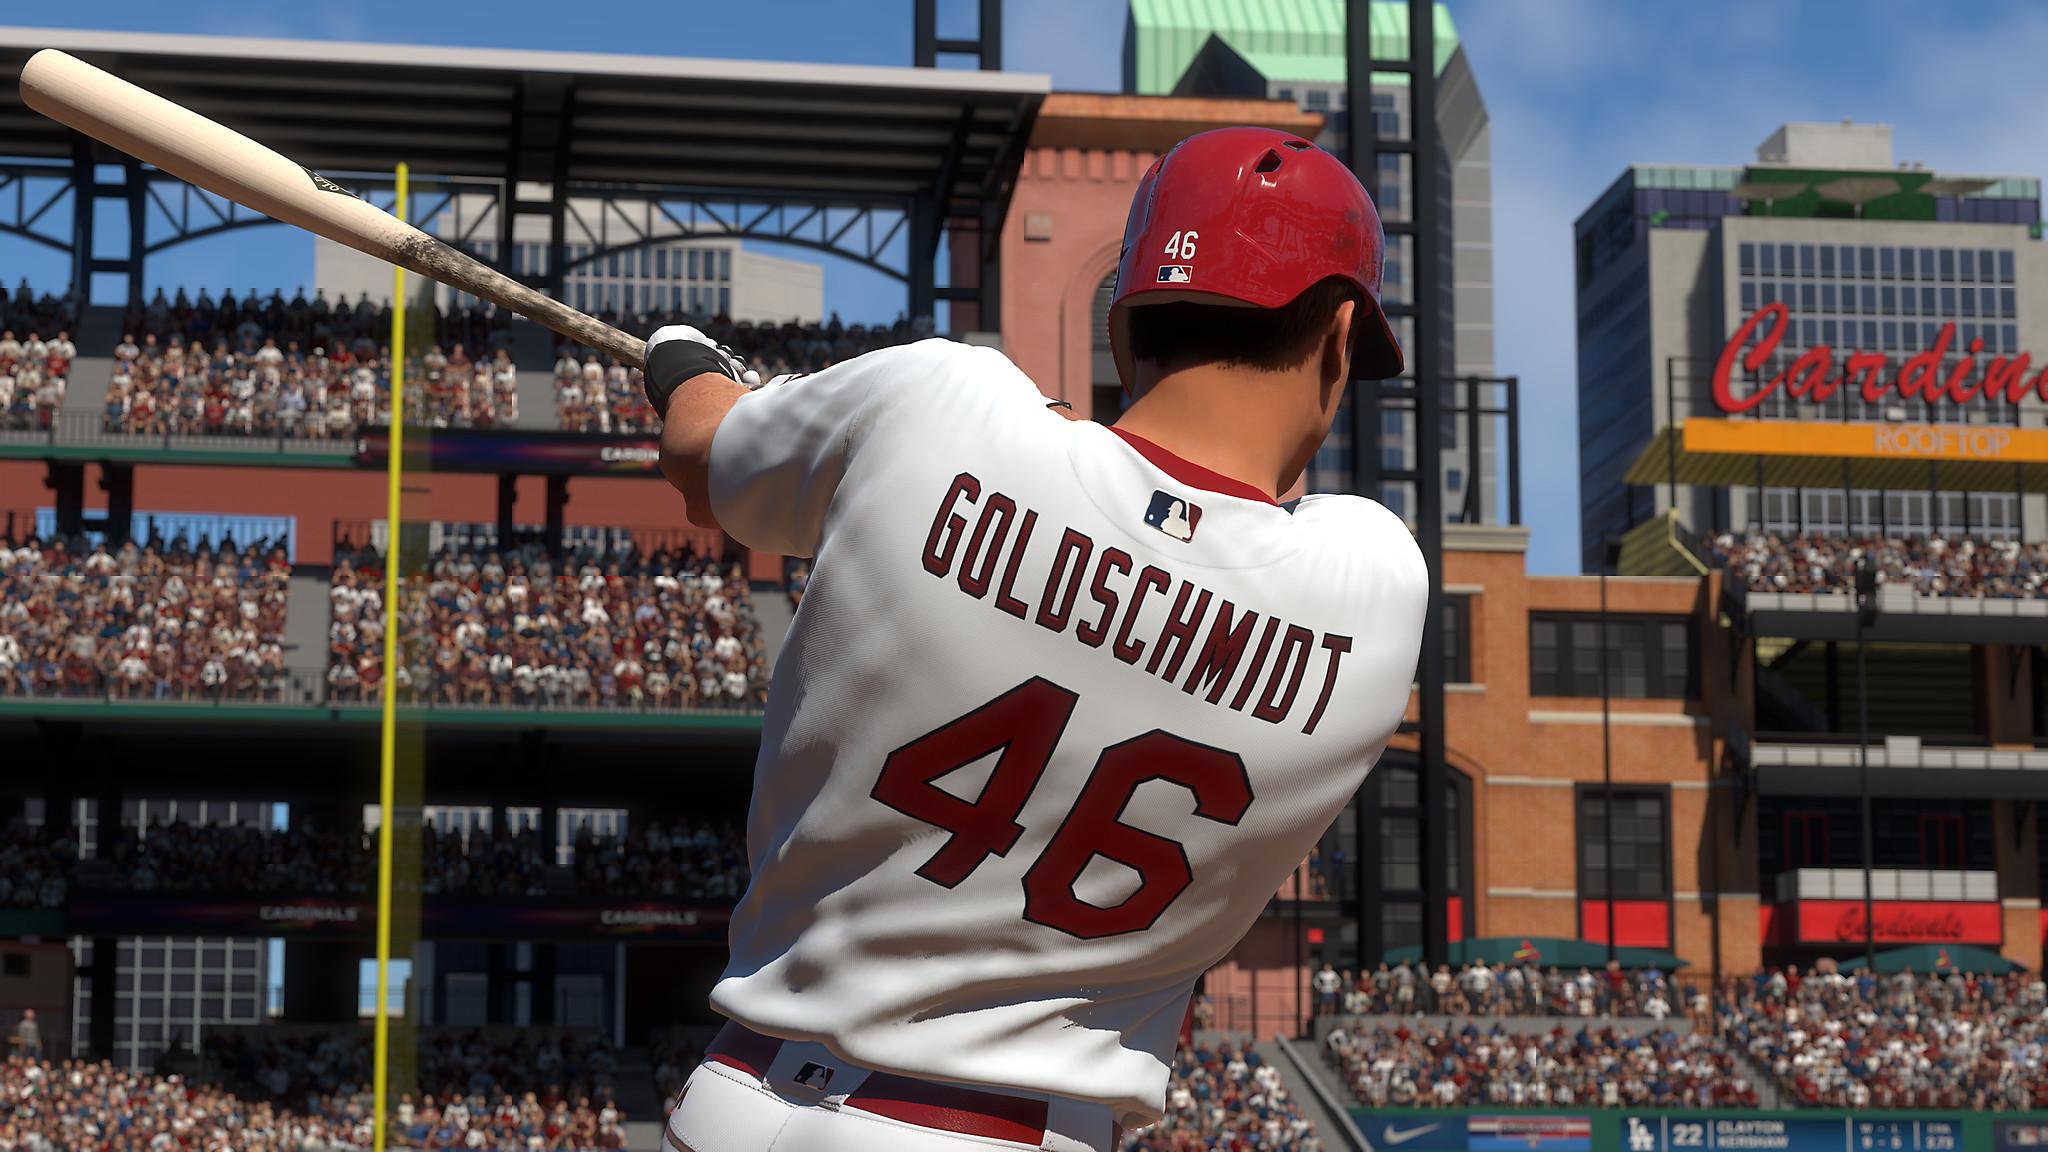 MLB The Show Wallpaper Free MLB The Show Background